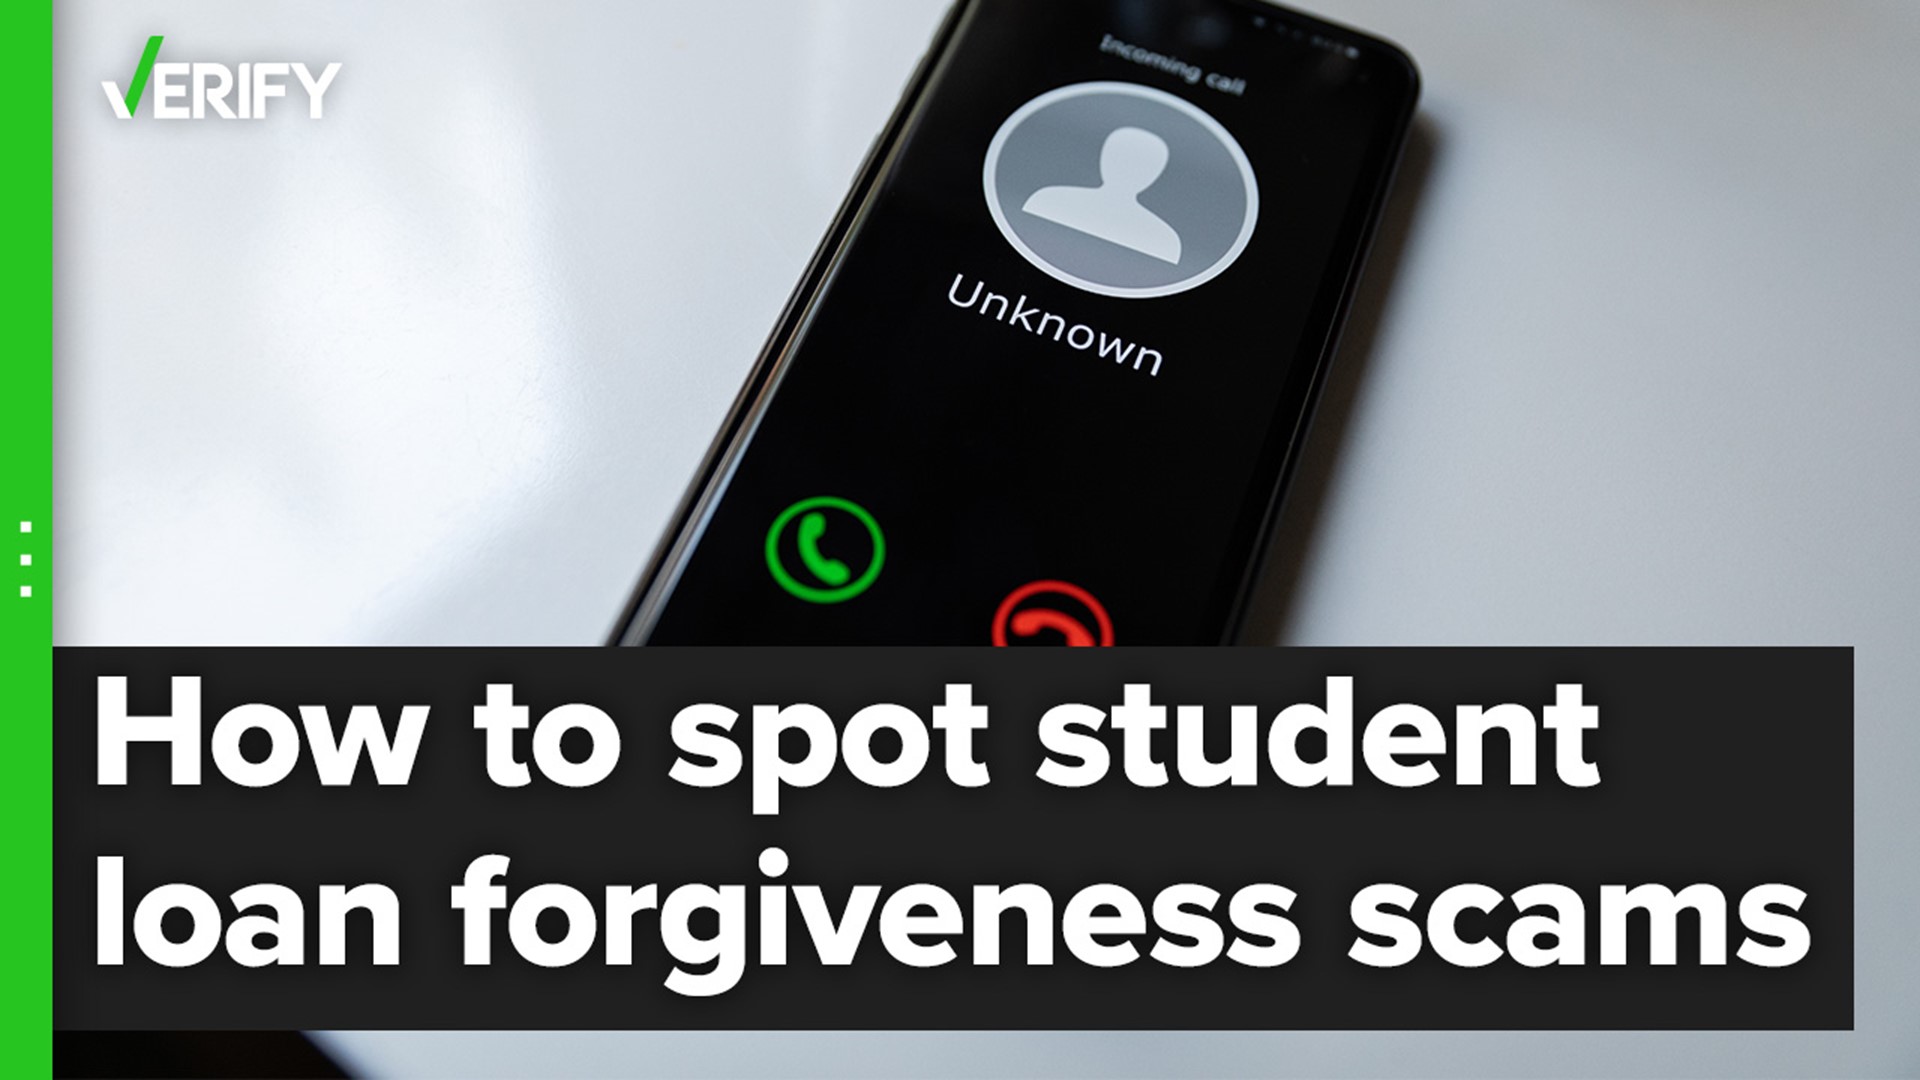 Scammers claiming to offer student loan forgiveness are on the rise following Biden’s student debt relief announcement. Here are 3 ways to spot these scams.